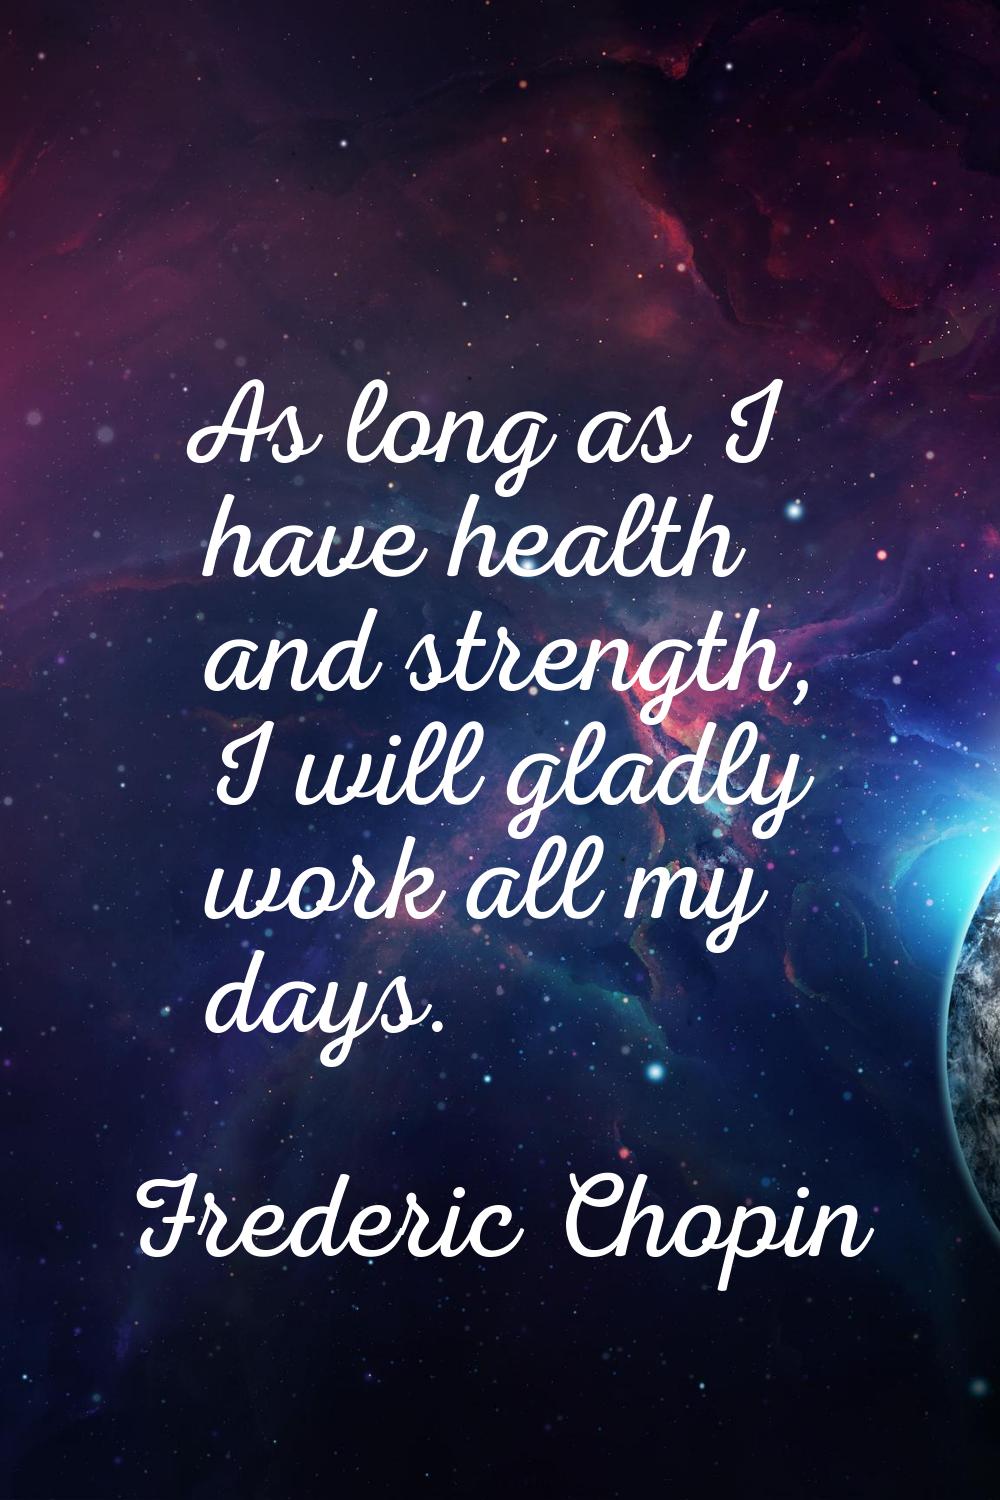 As long as I have health and strength, I will gladly work all my days.